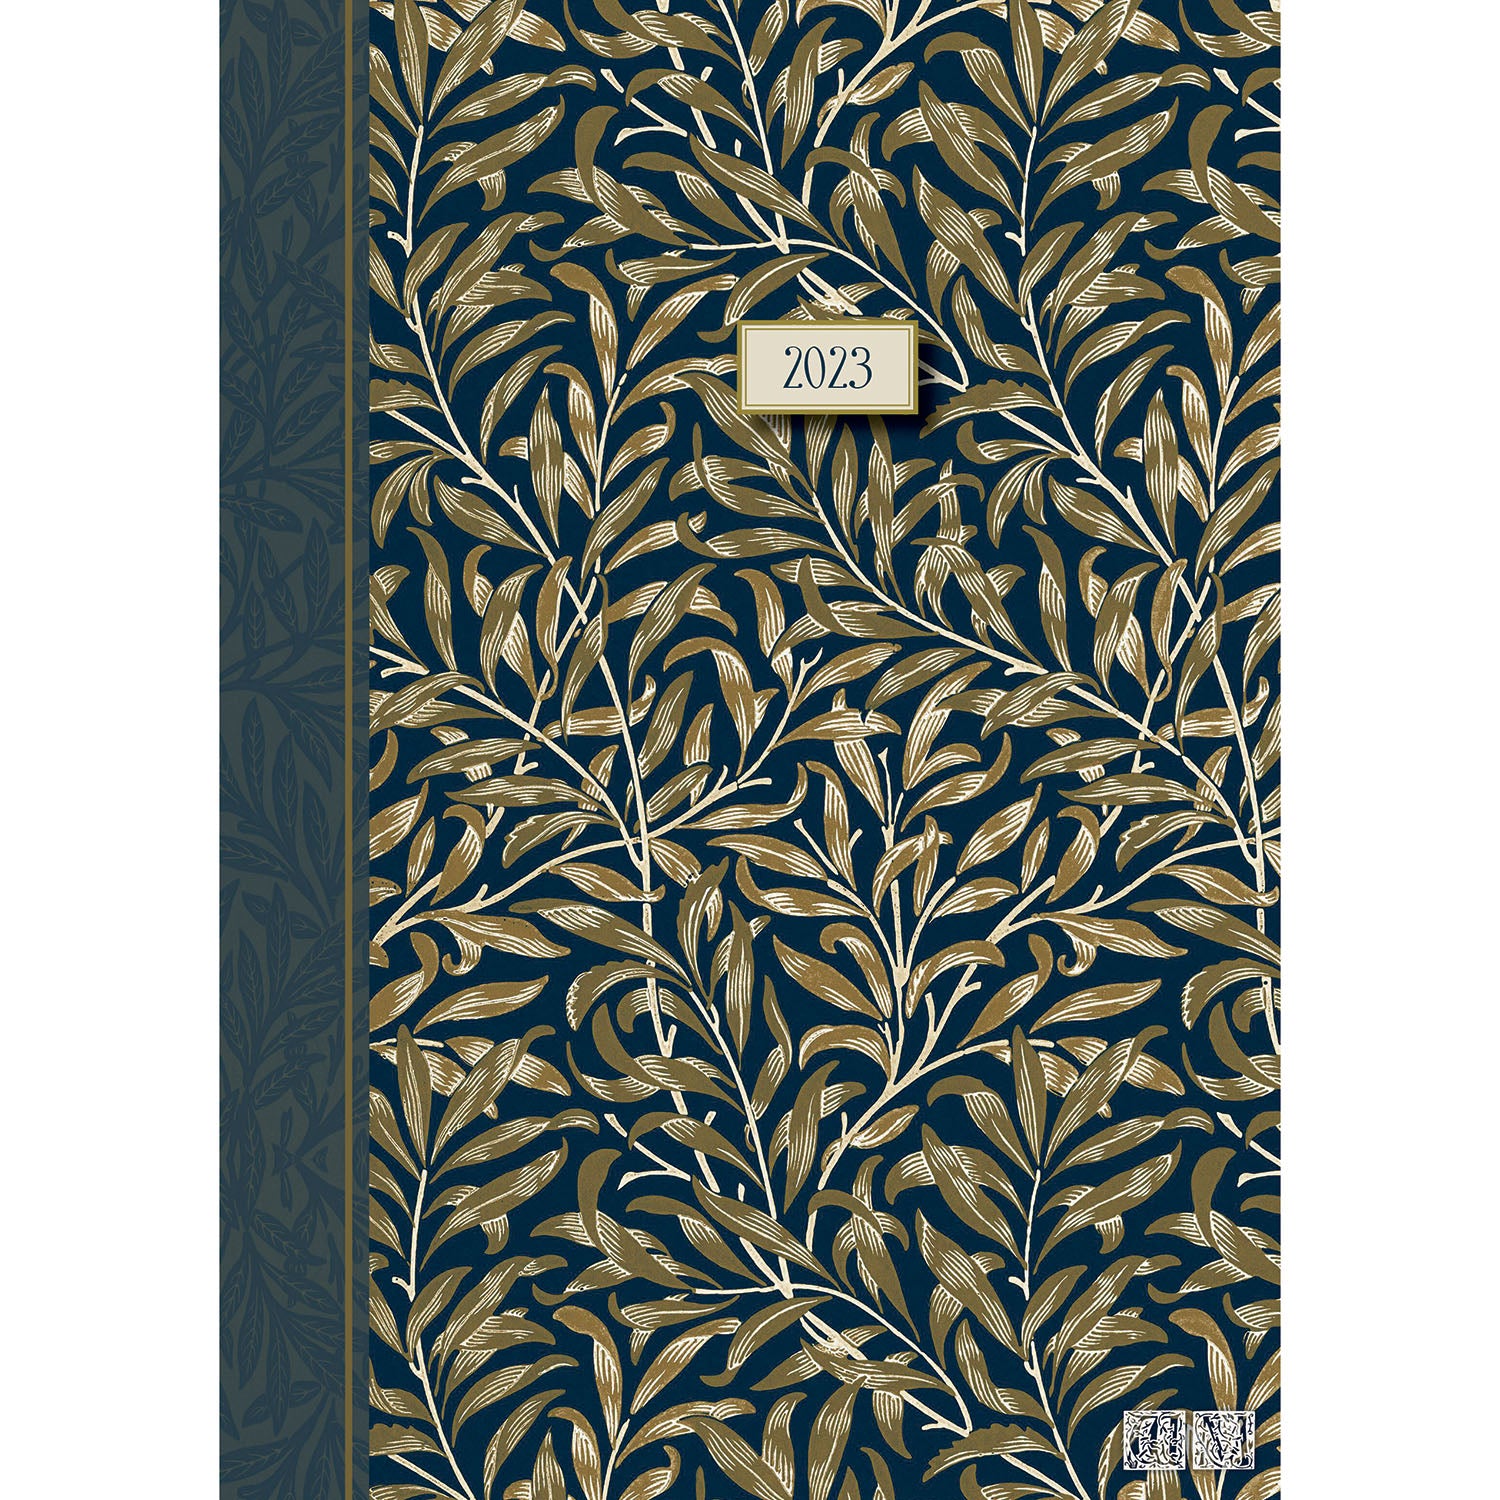 William Morris - Willow Bough - 2023 A5 Padded Cover Diary Premium Planner Gift - Zmart Australia